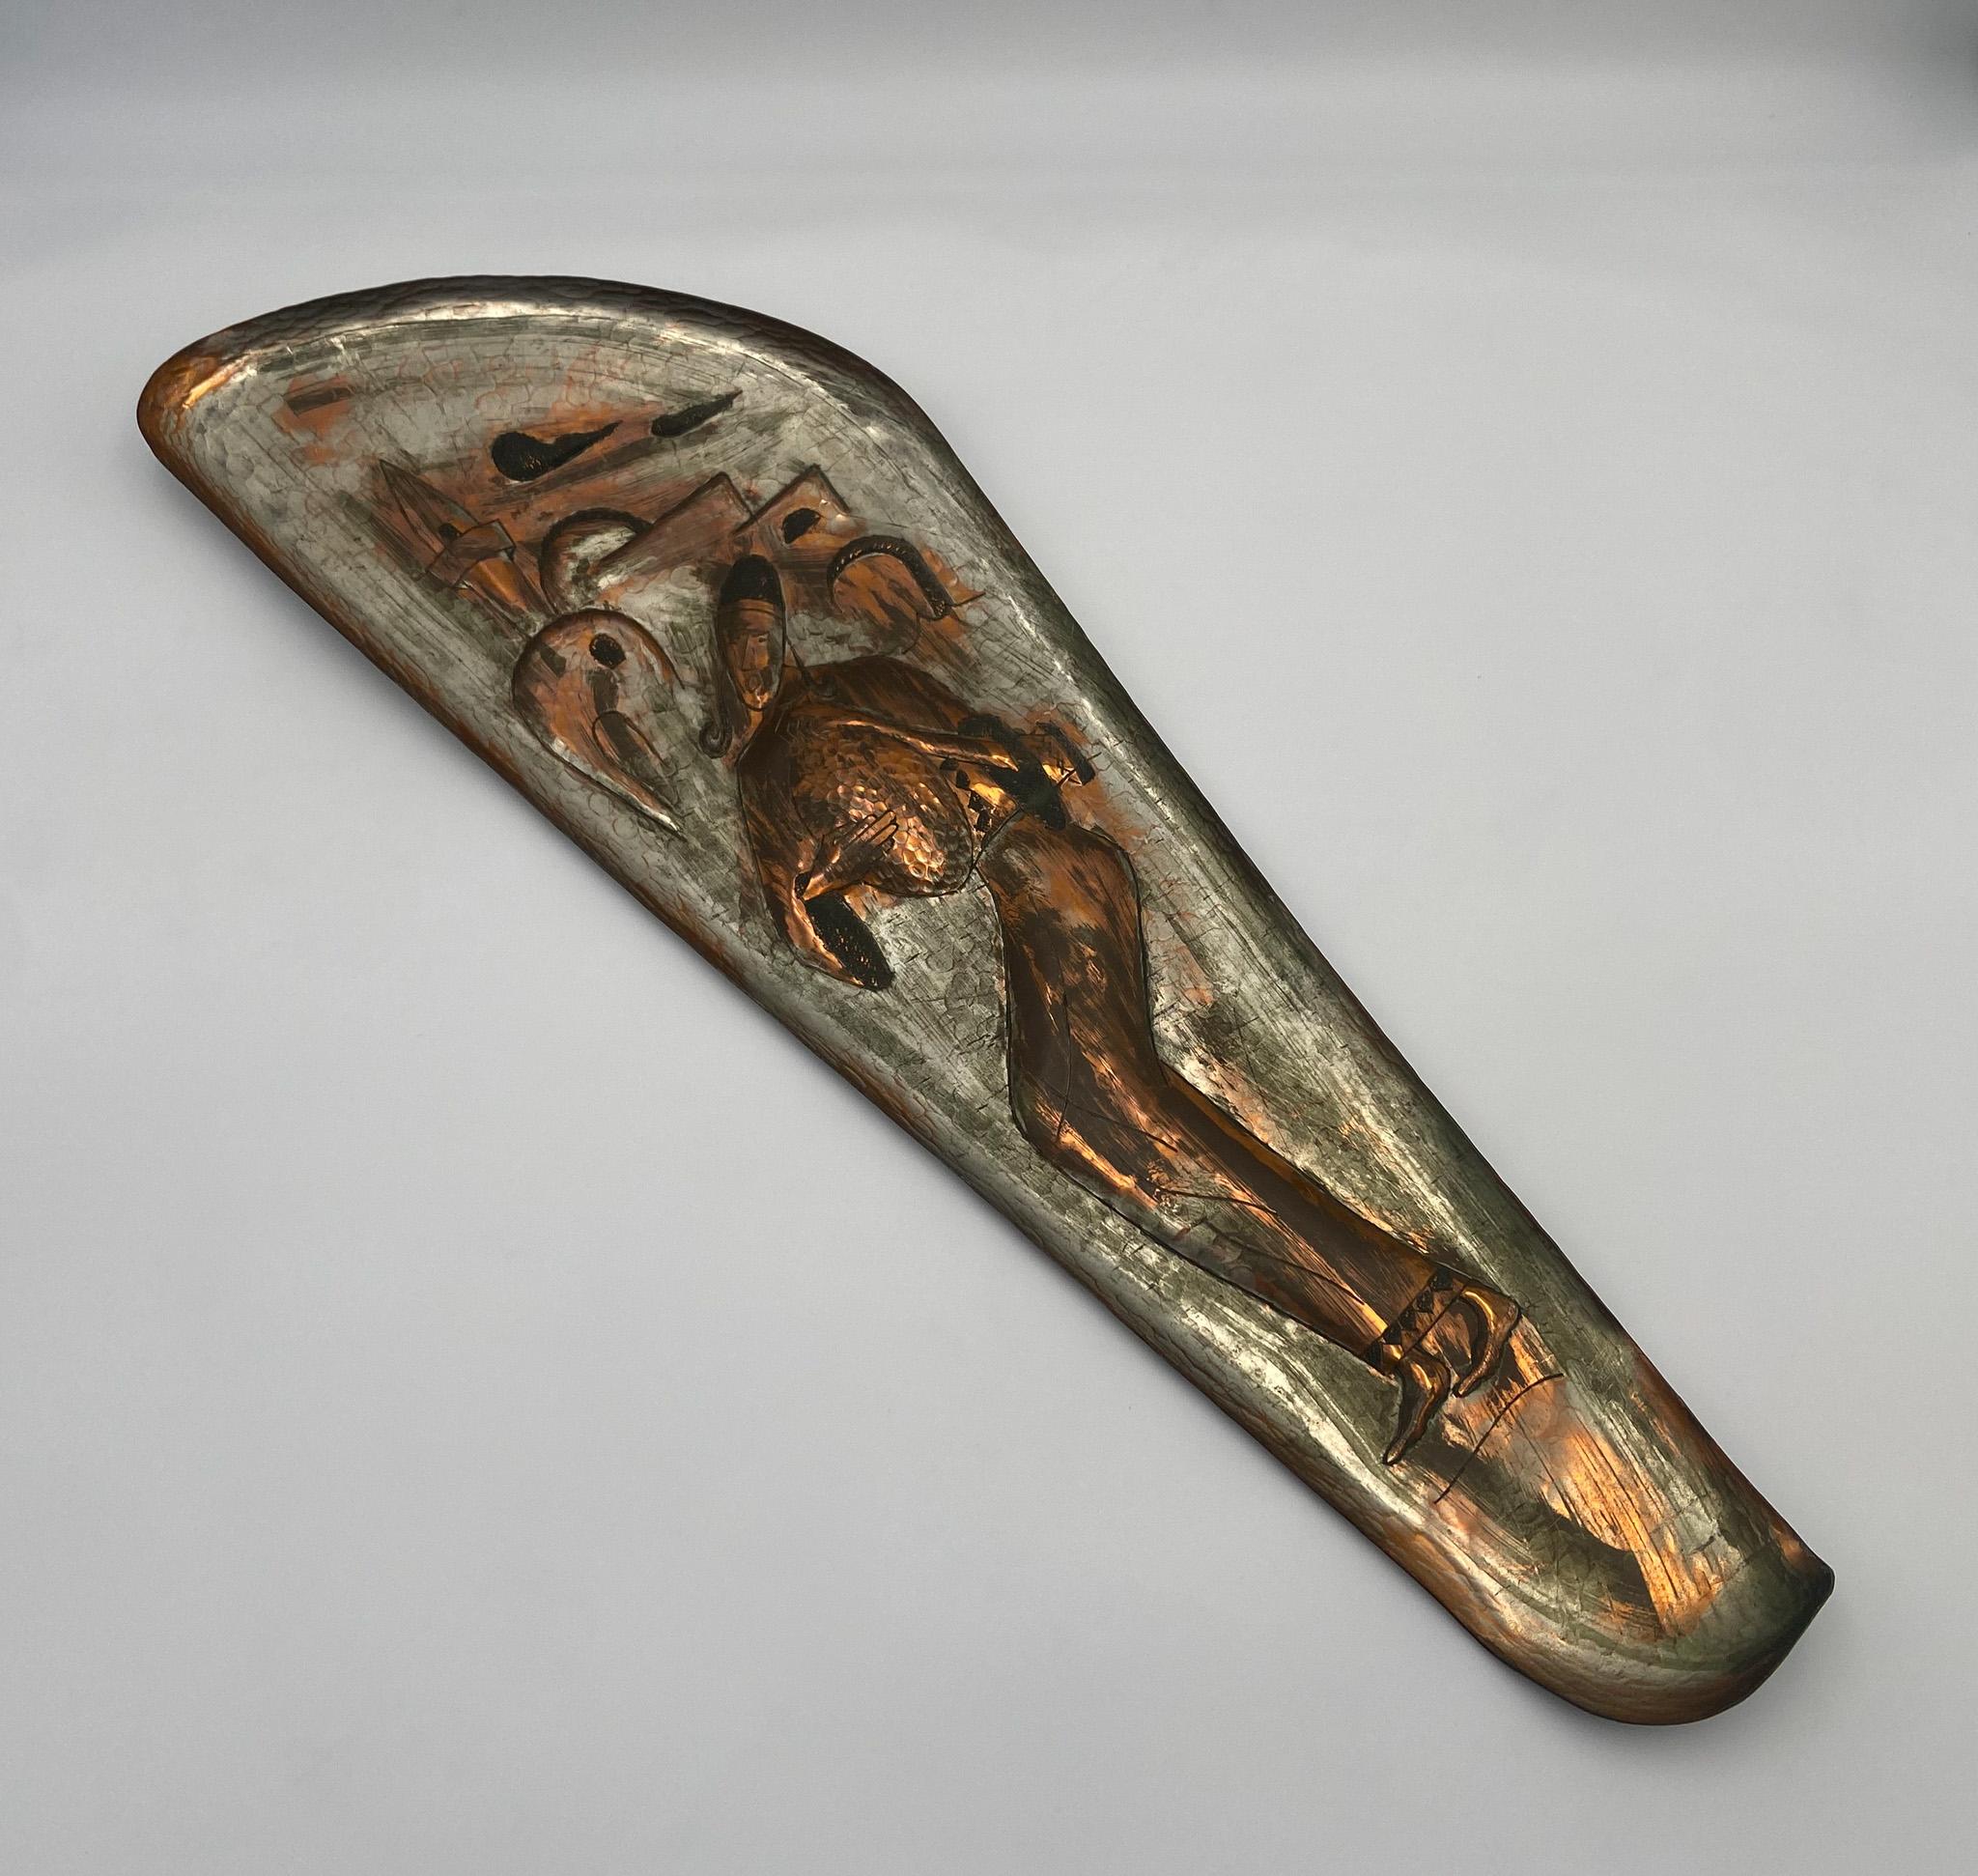 The Drummer Copper Tray Platter Wall Hanging Platter by A.N Oppenheim,  Israel. 1950's.